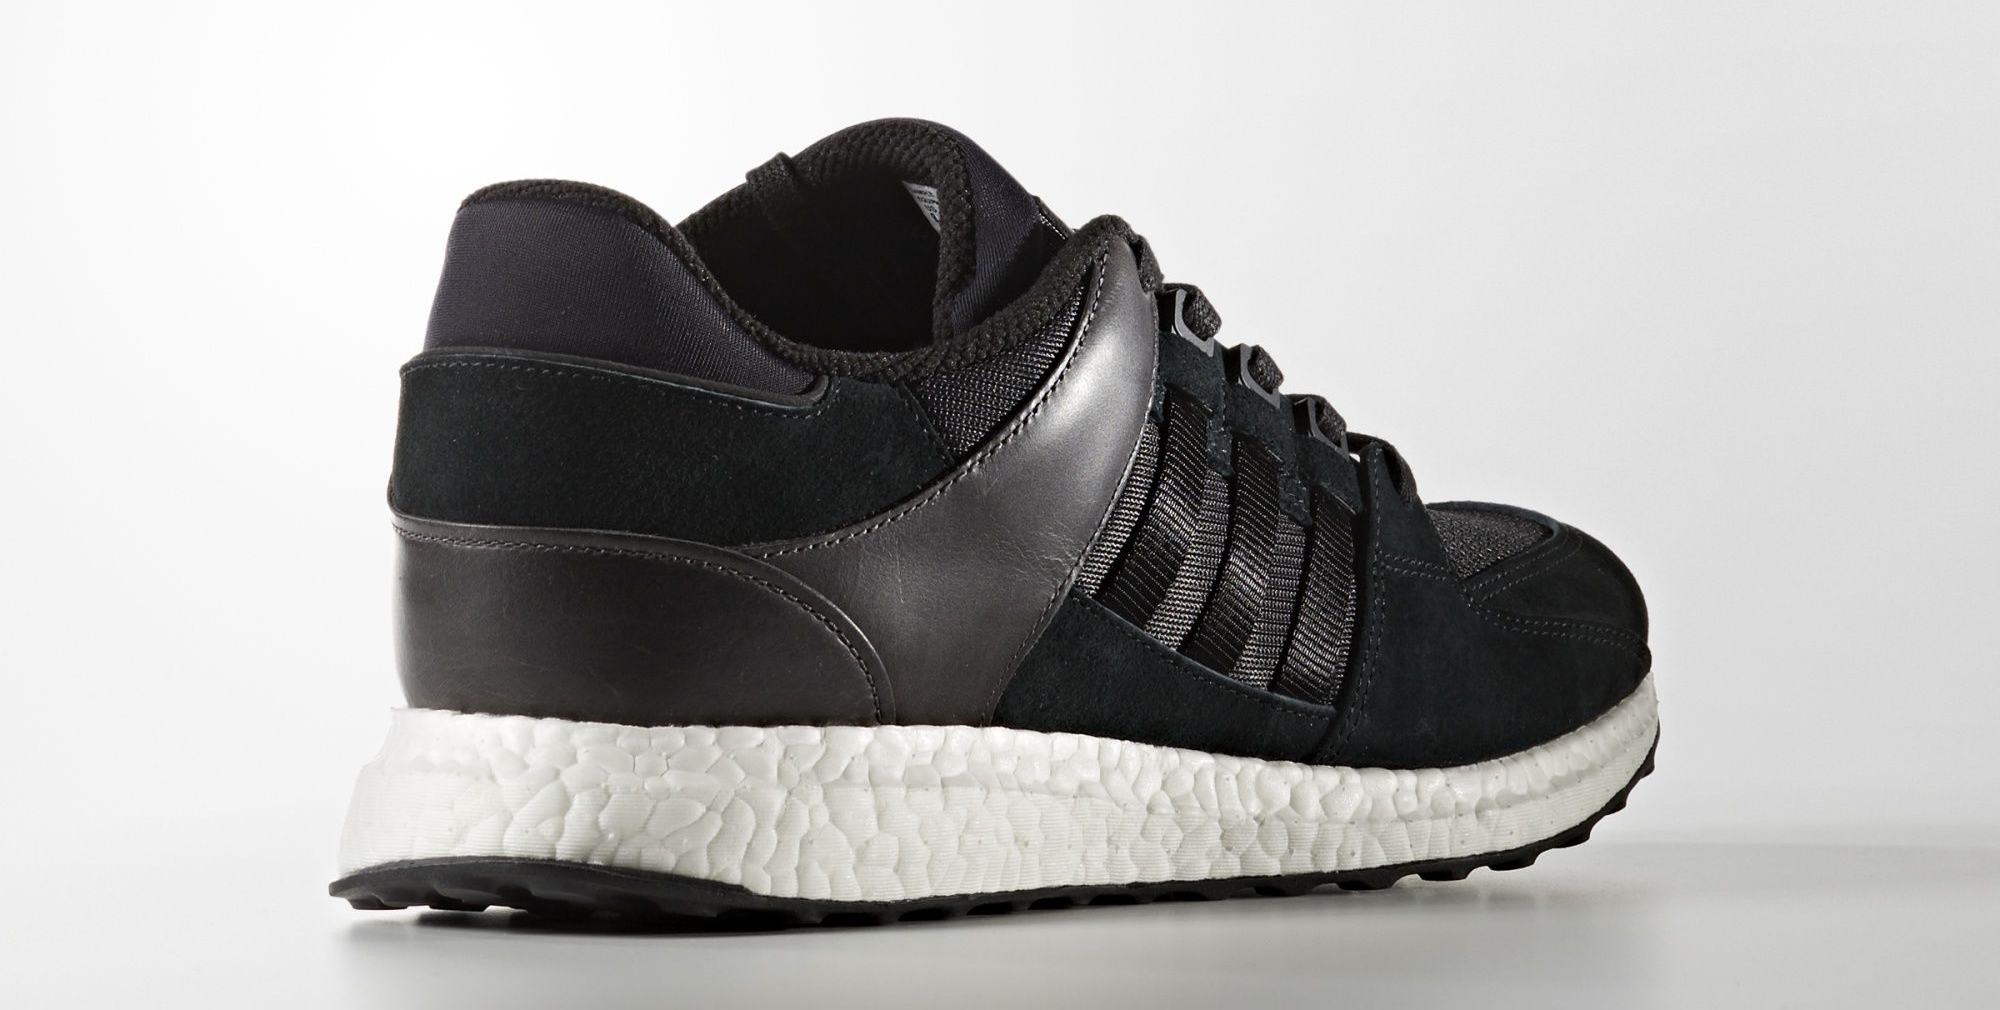 adidas-eqt-support-ultra-boost-milled-leather-pack-1